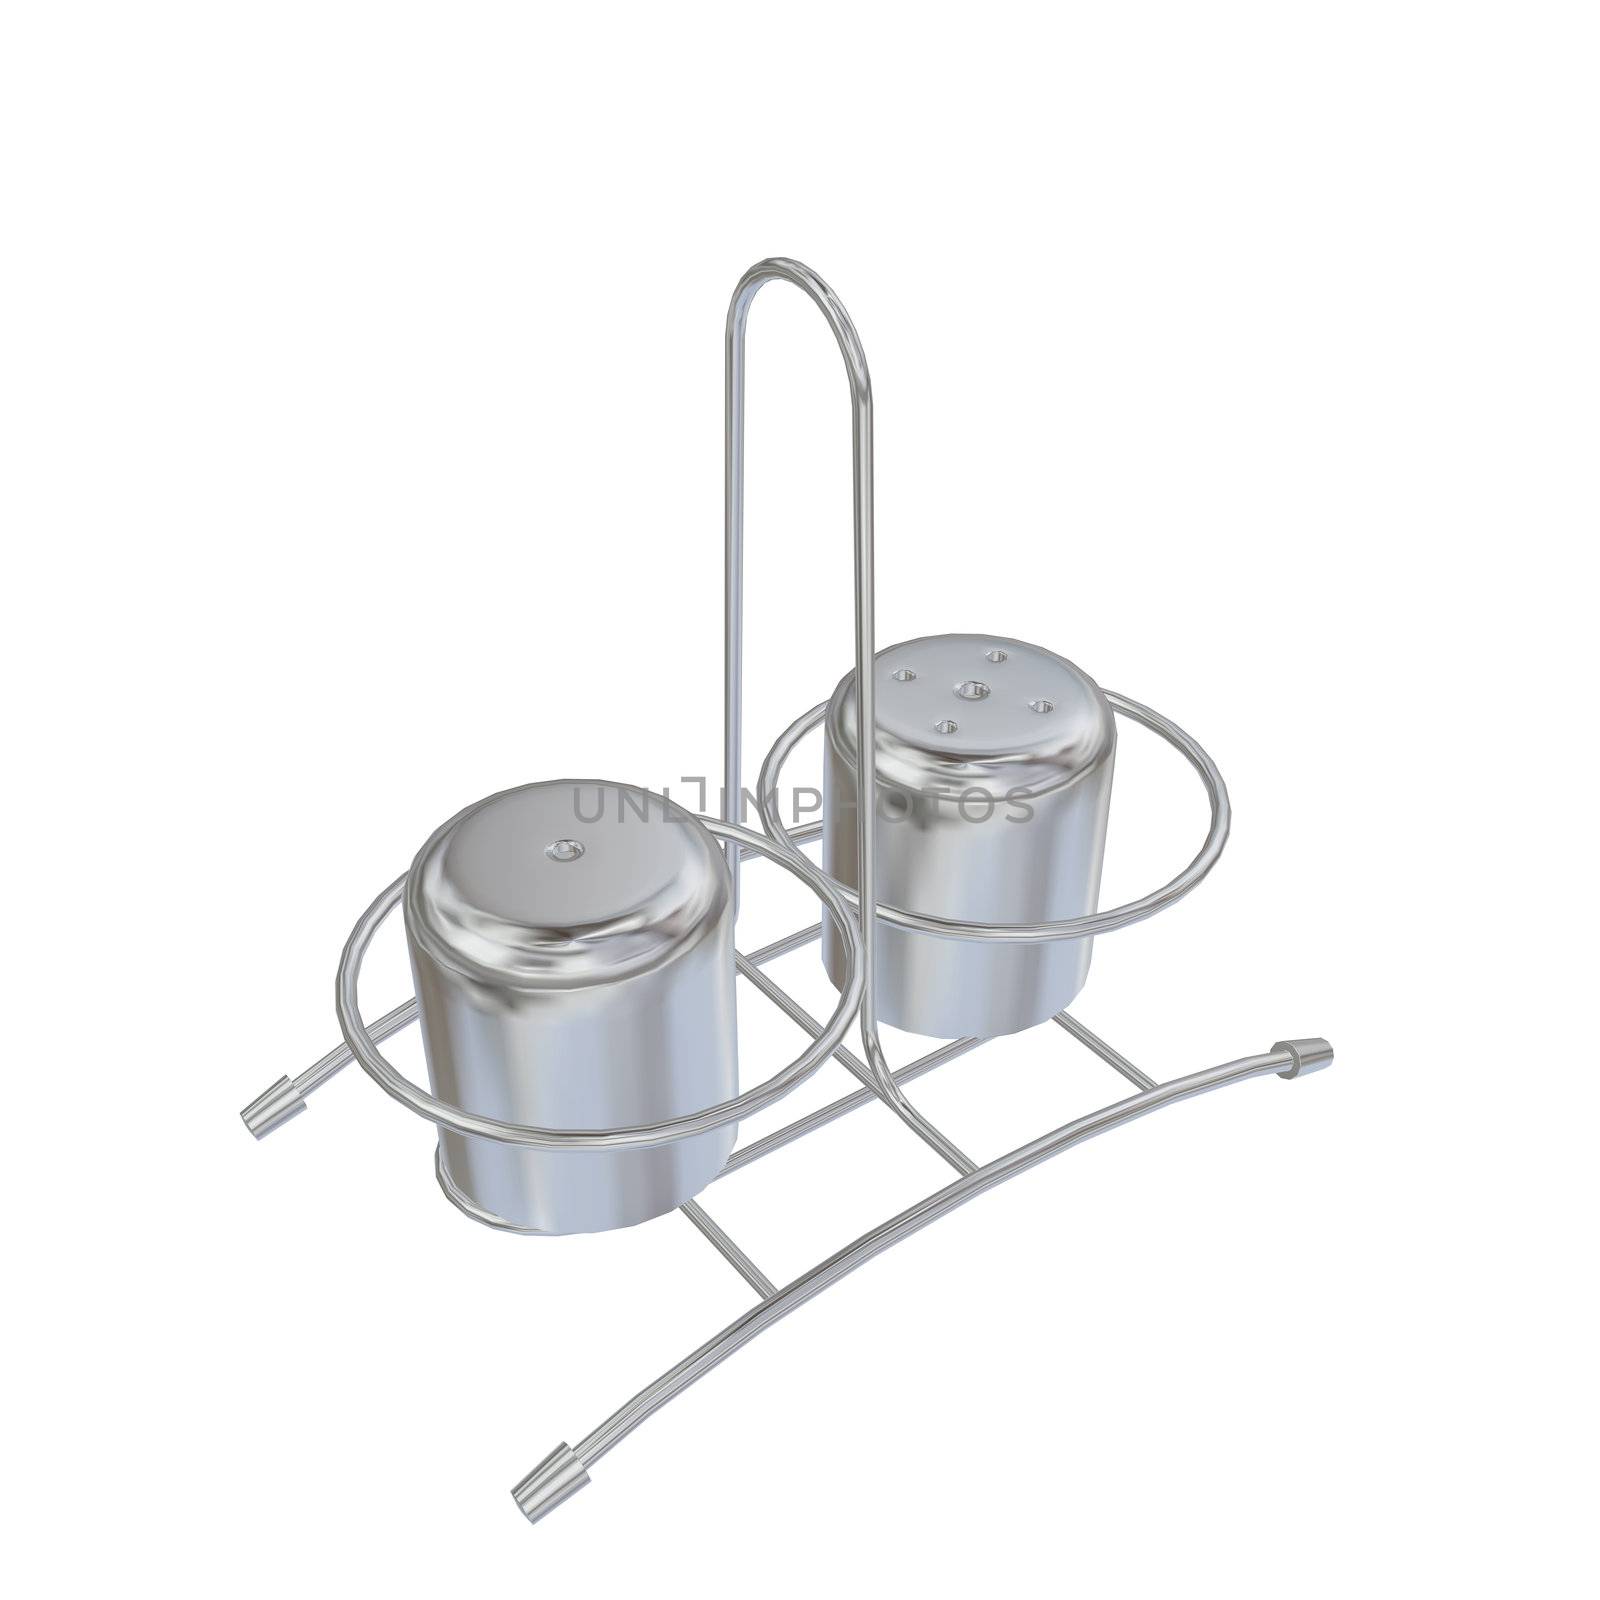 Stainless steel salt and pepper shakers with rack, 3D illustrati by Morphart